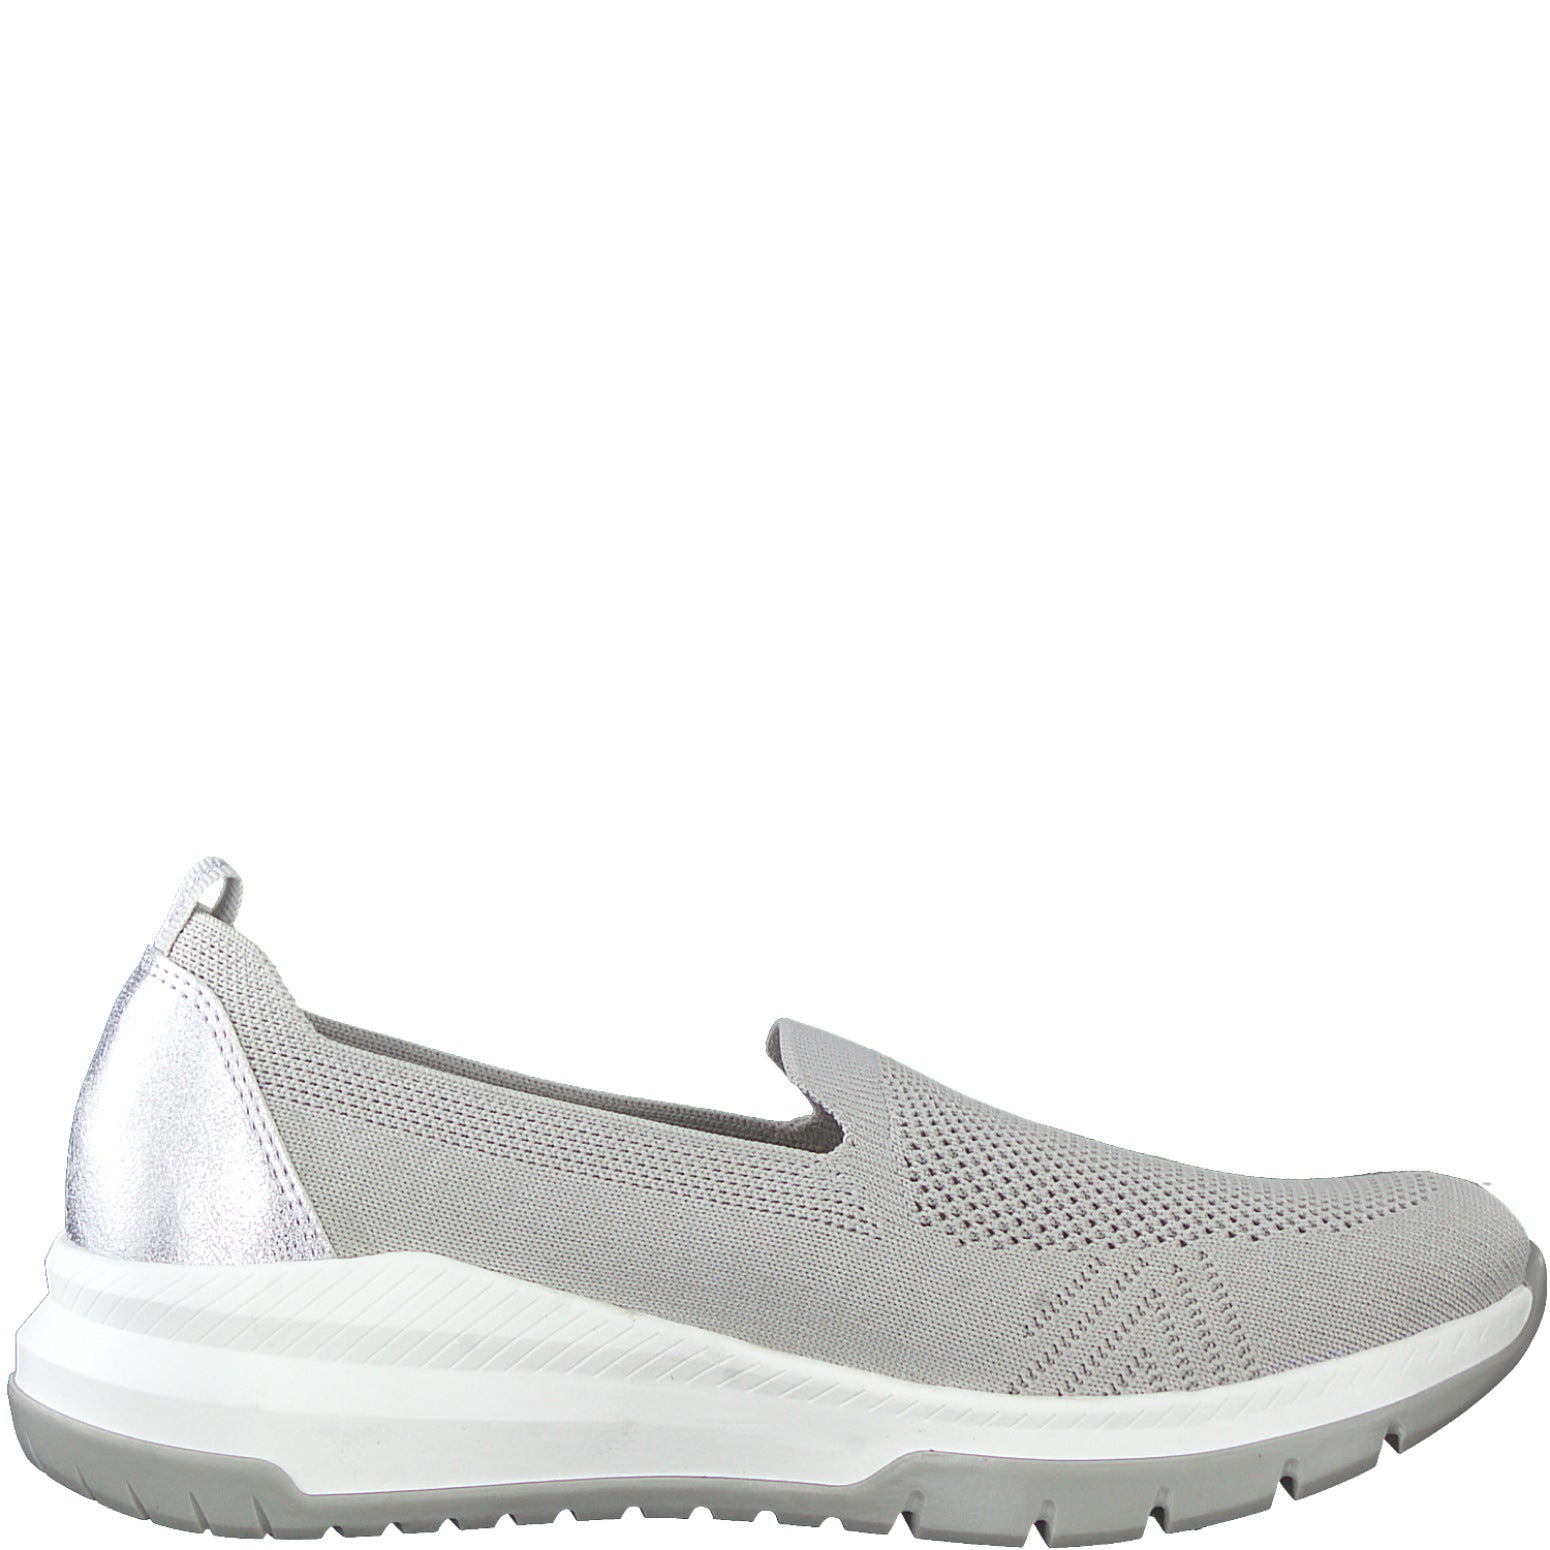 Classic Comfort Slip-On Low Shoes for Summer Days